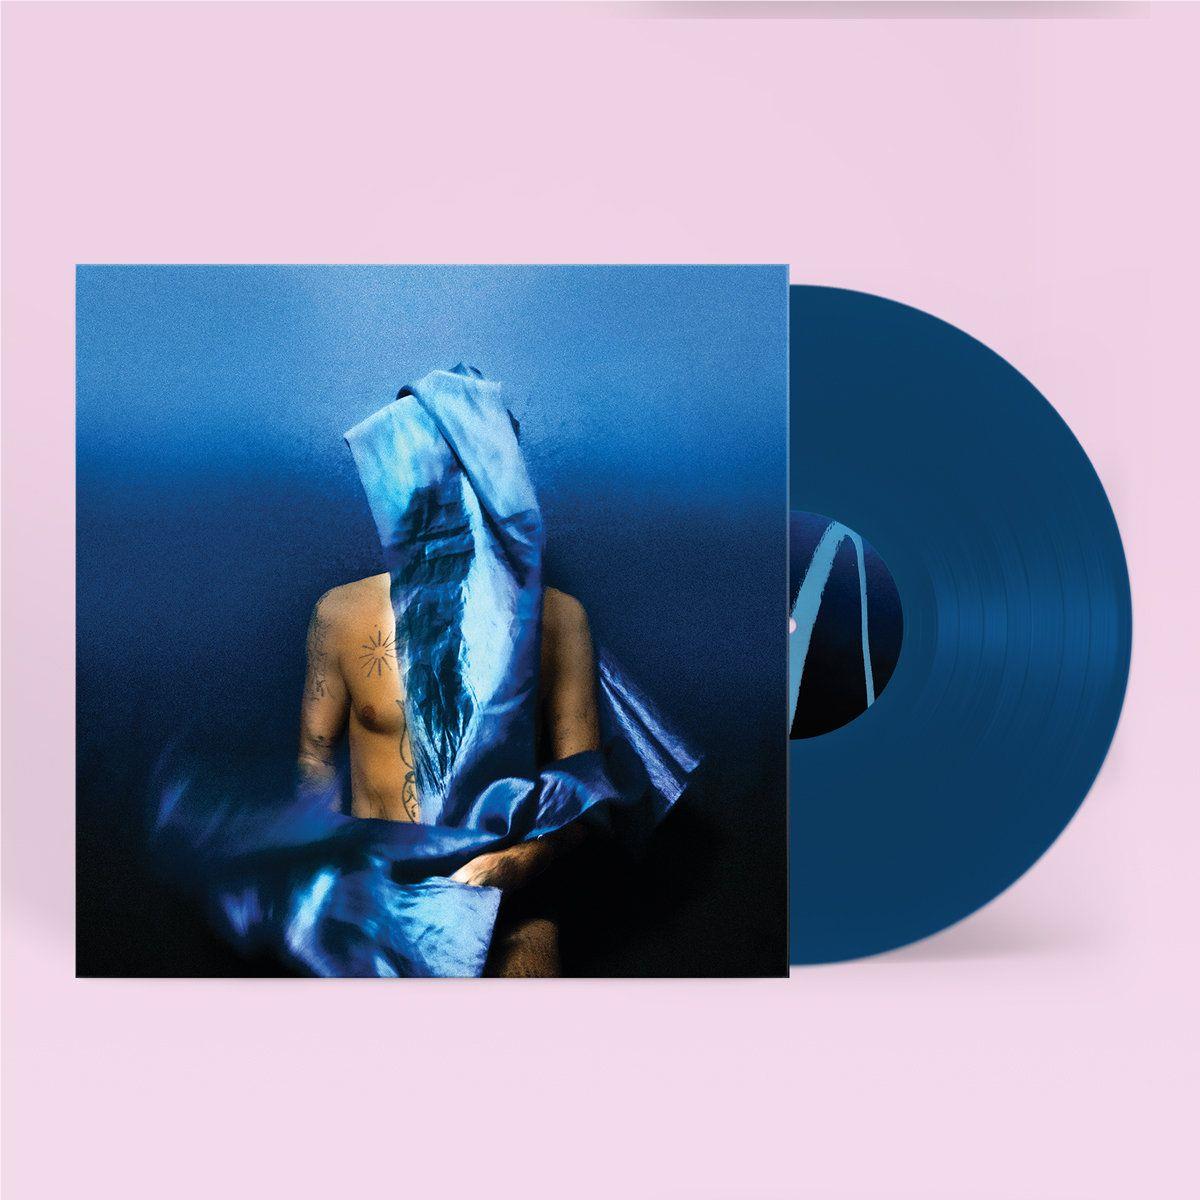 flying wig (limited opaque blue vinyl)